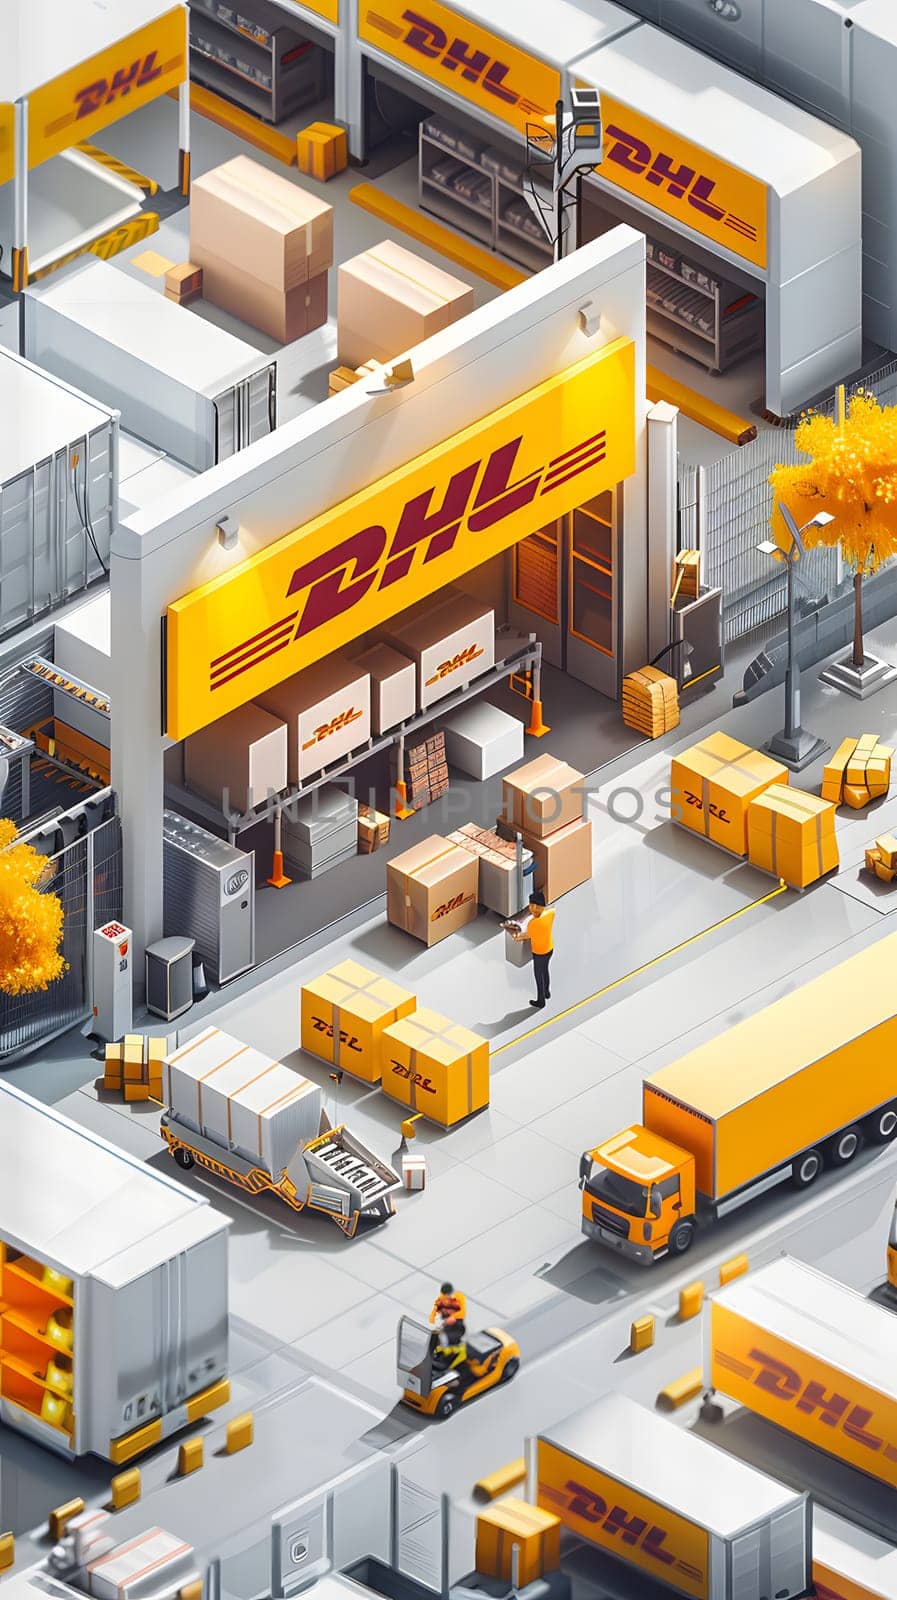 An isometric view of a DHL warehouse with yellow trucks and boxes on the asphalt road, showcasing the combination of vehicles, building, and engineering